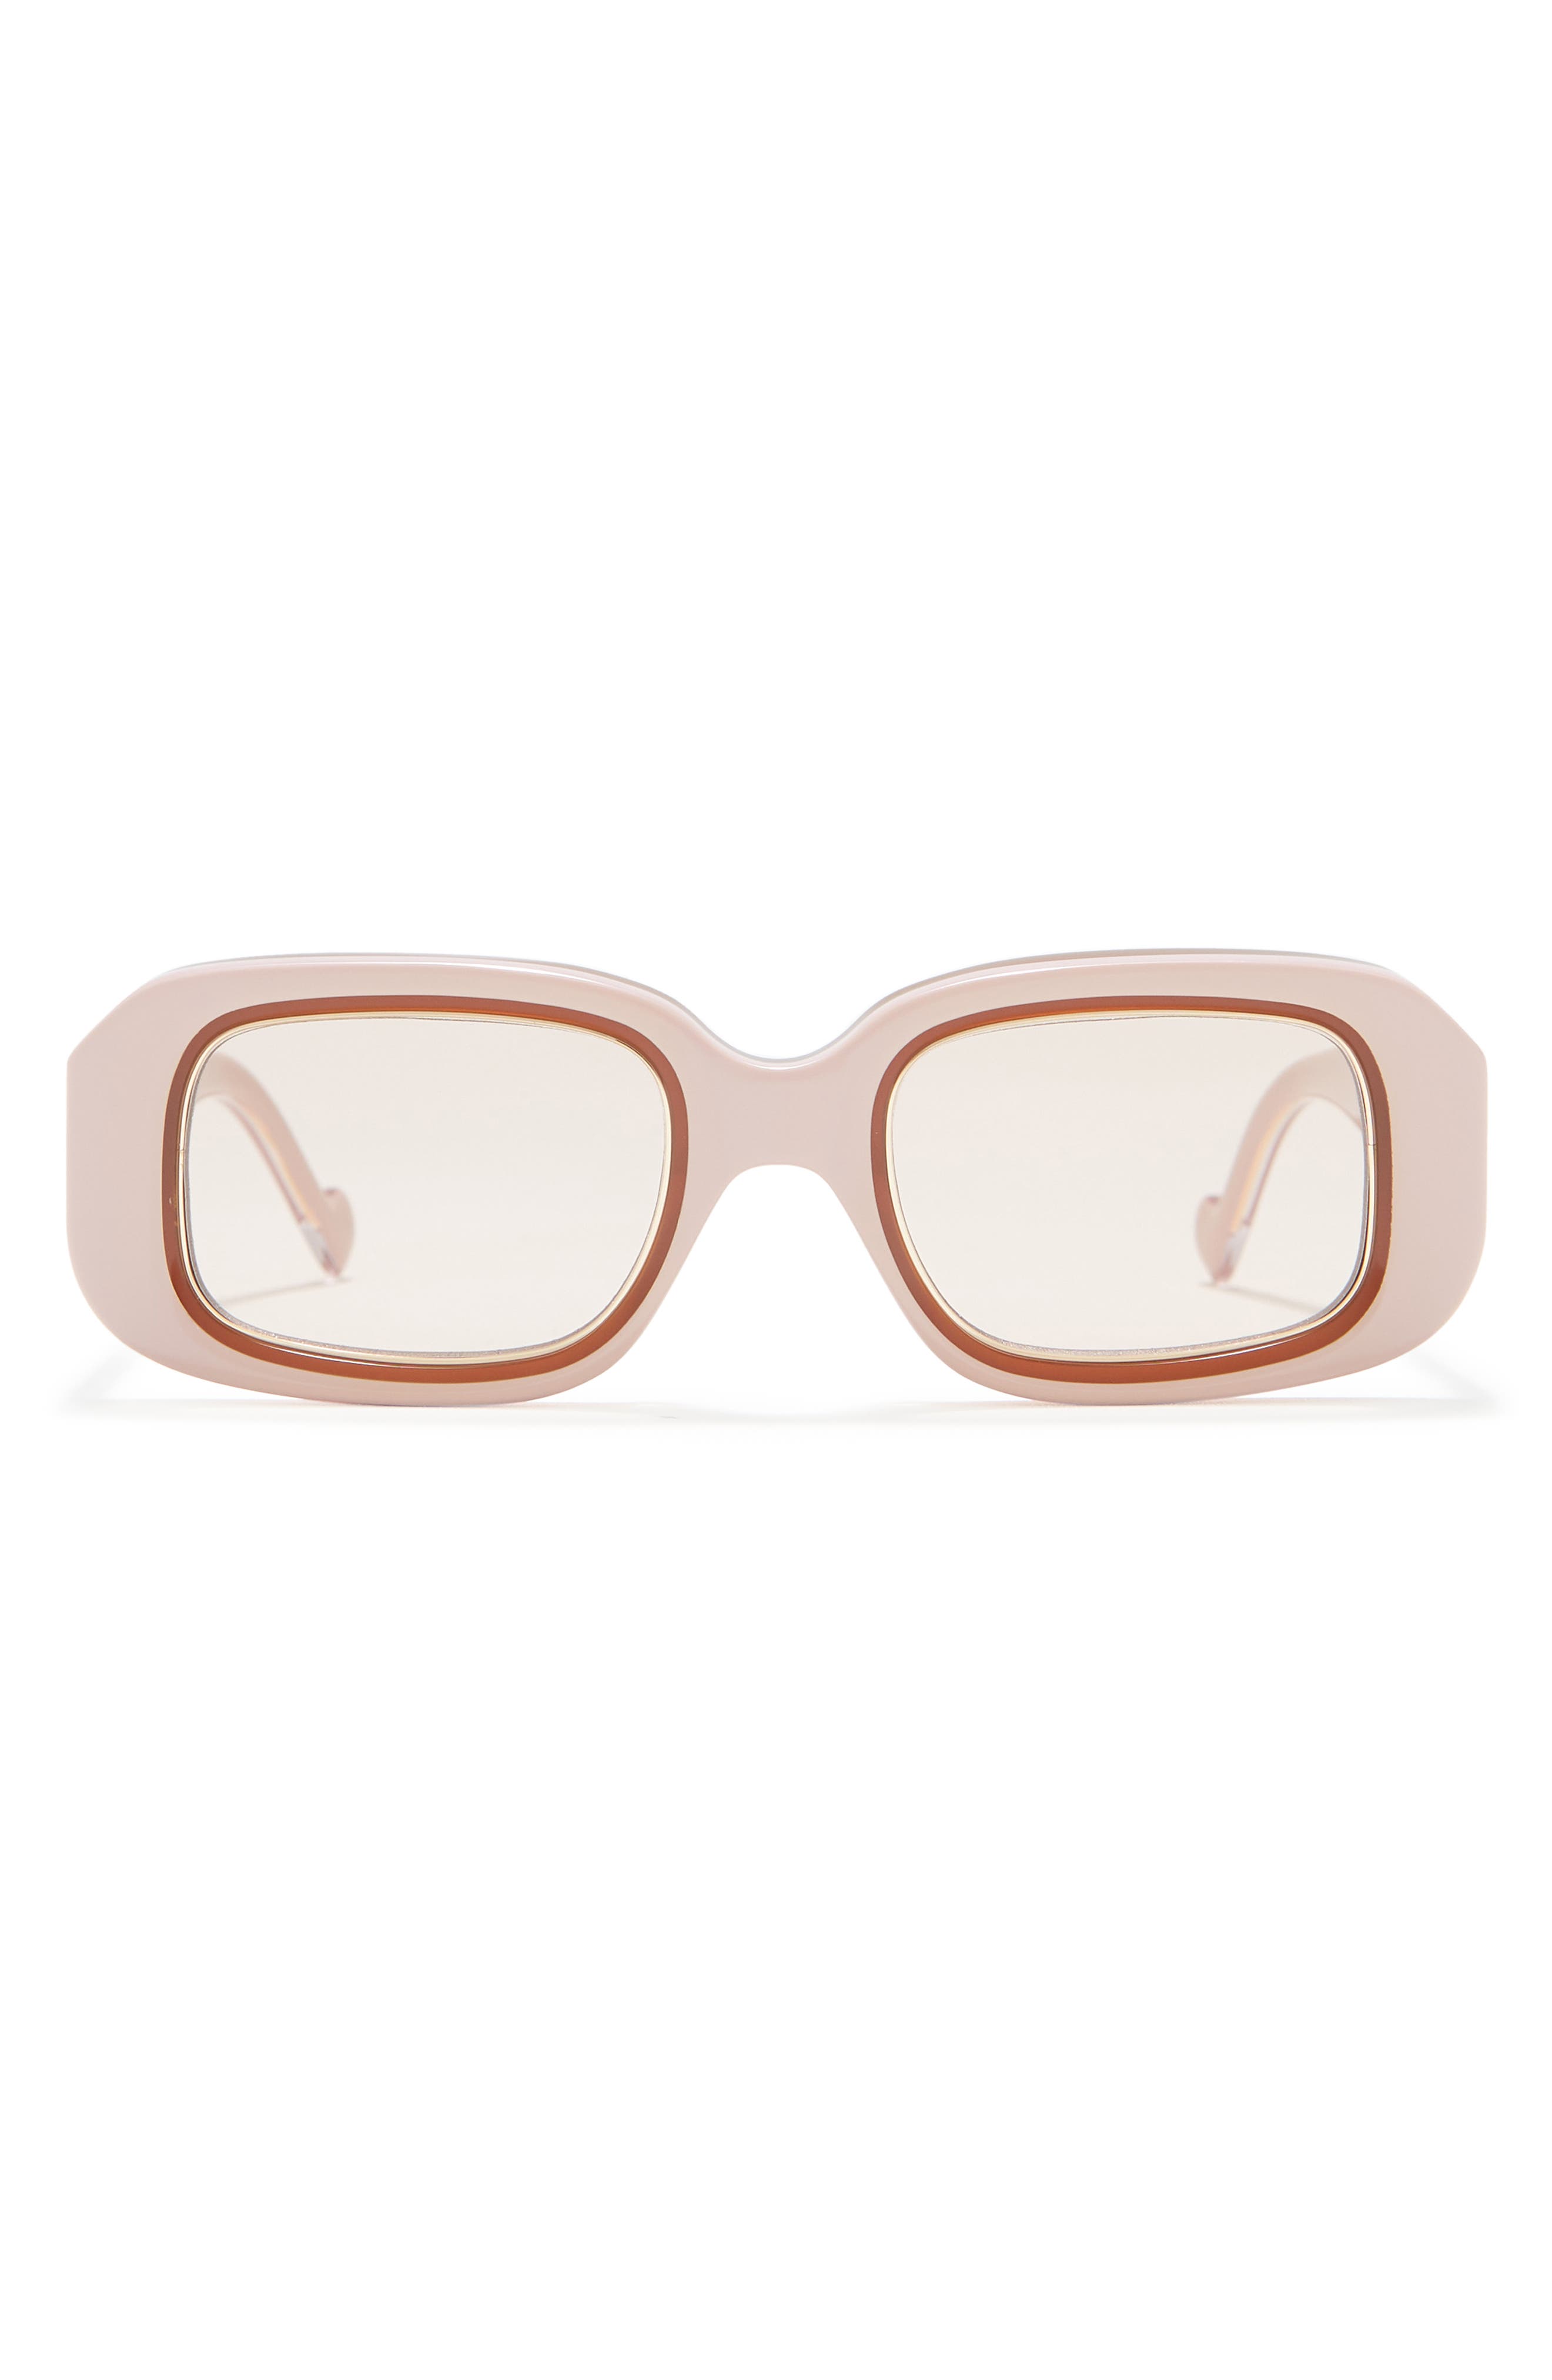 Zimmermann Fortune 49mm Rectangle Sunglasses In Dusty Pink / Tan Tint